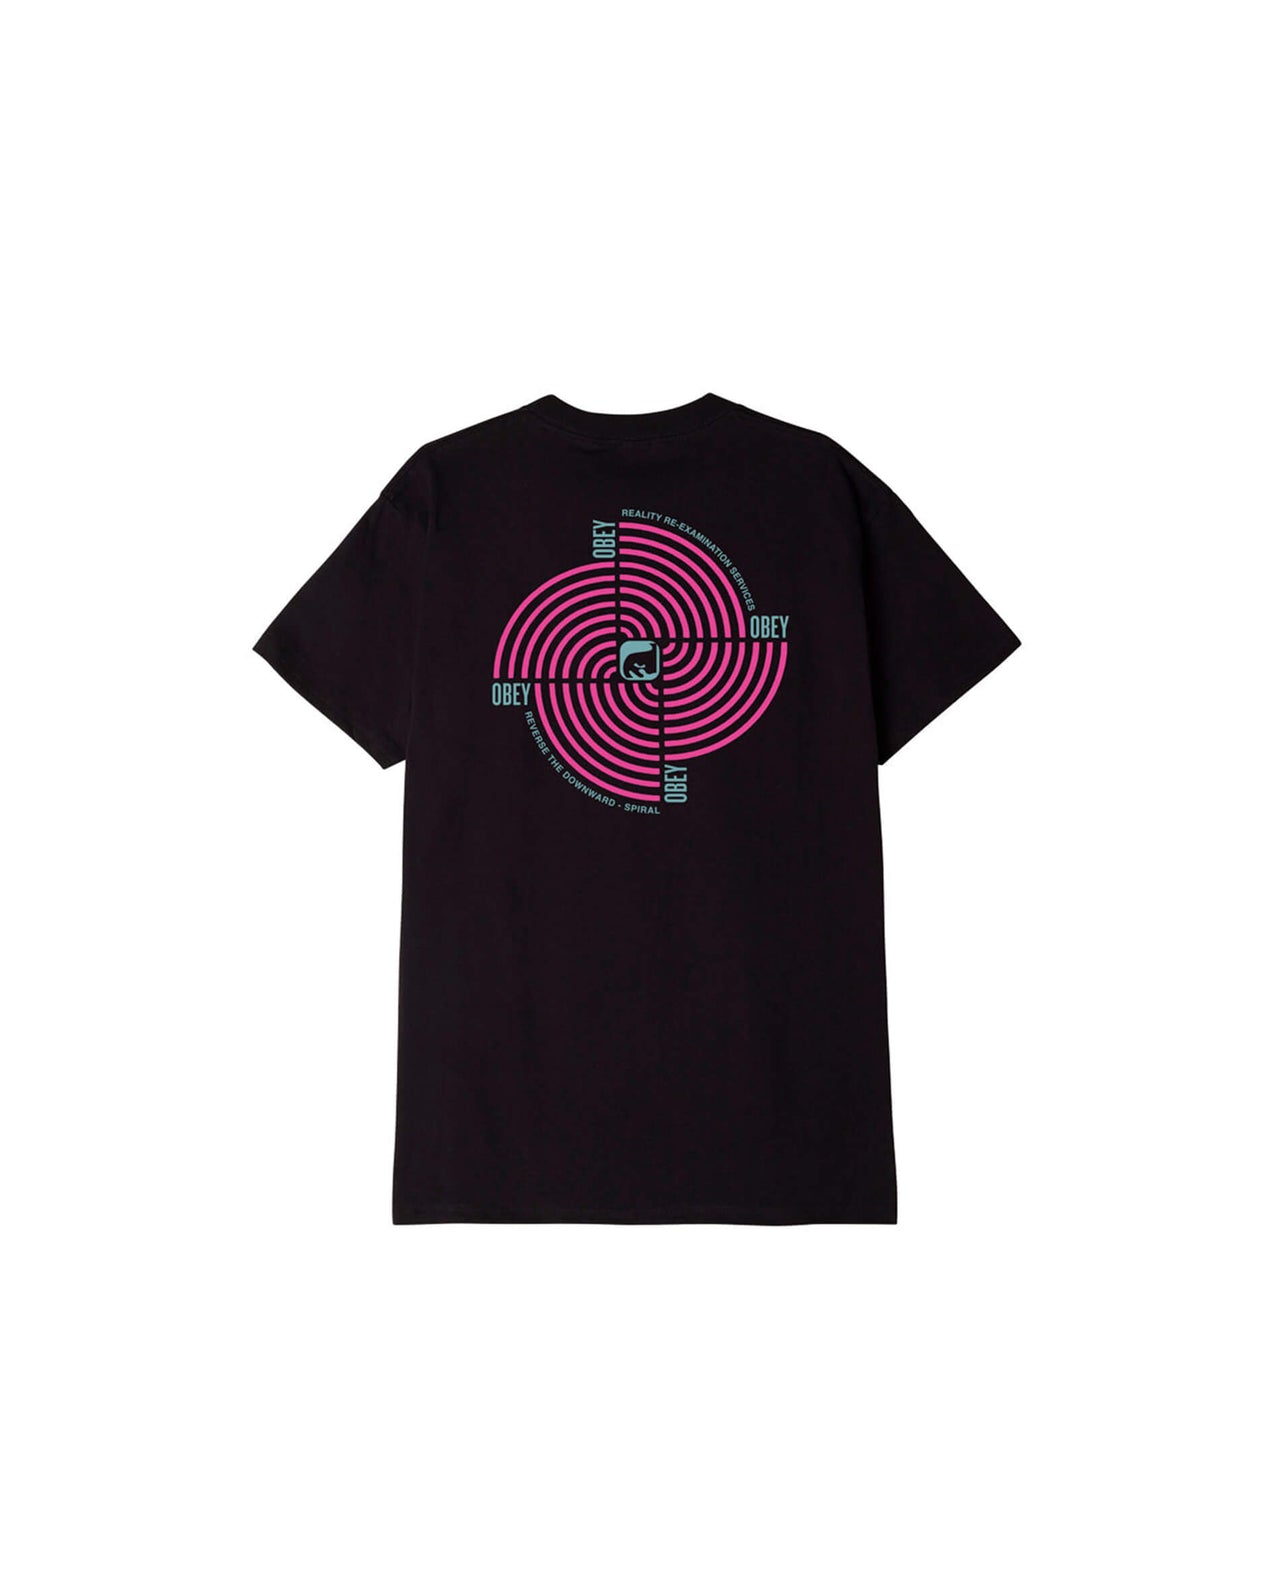 Obey Downward Spiral Classic Tee